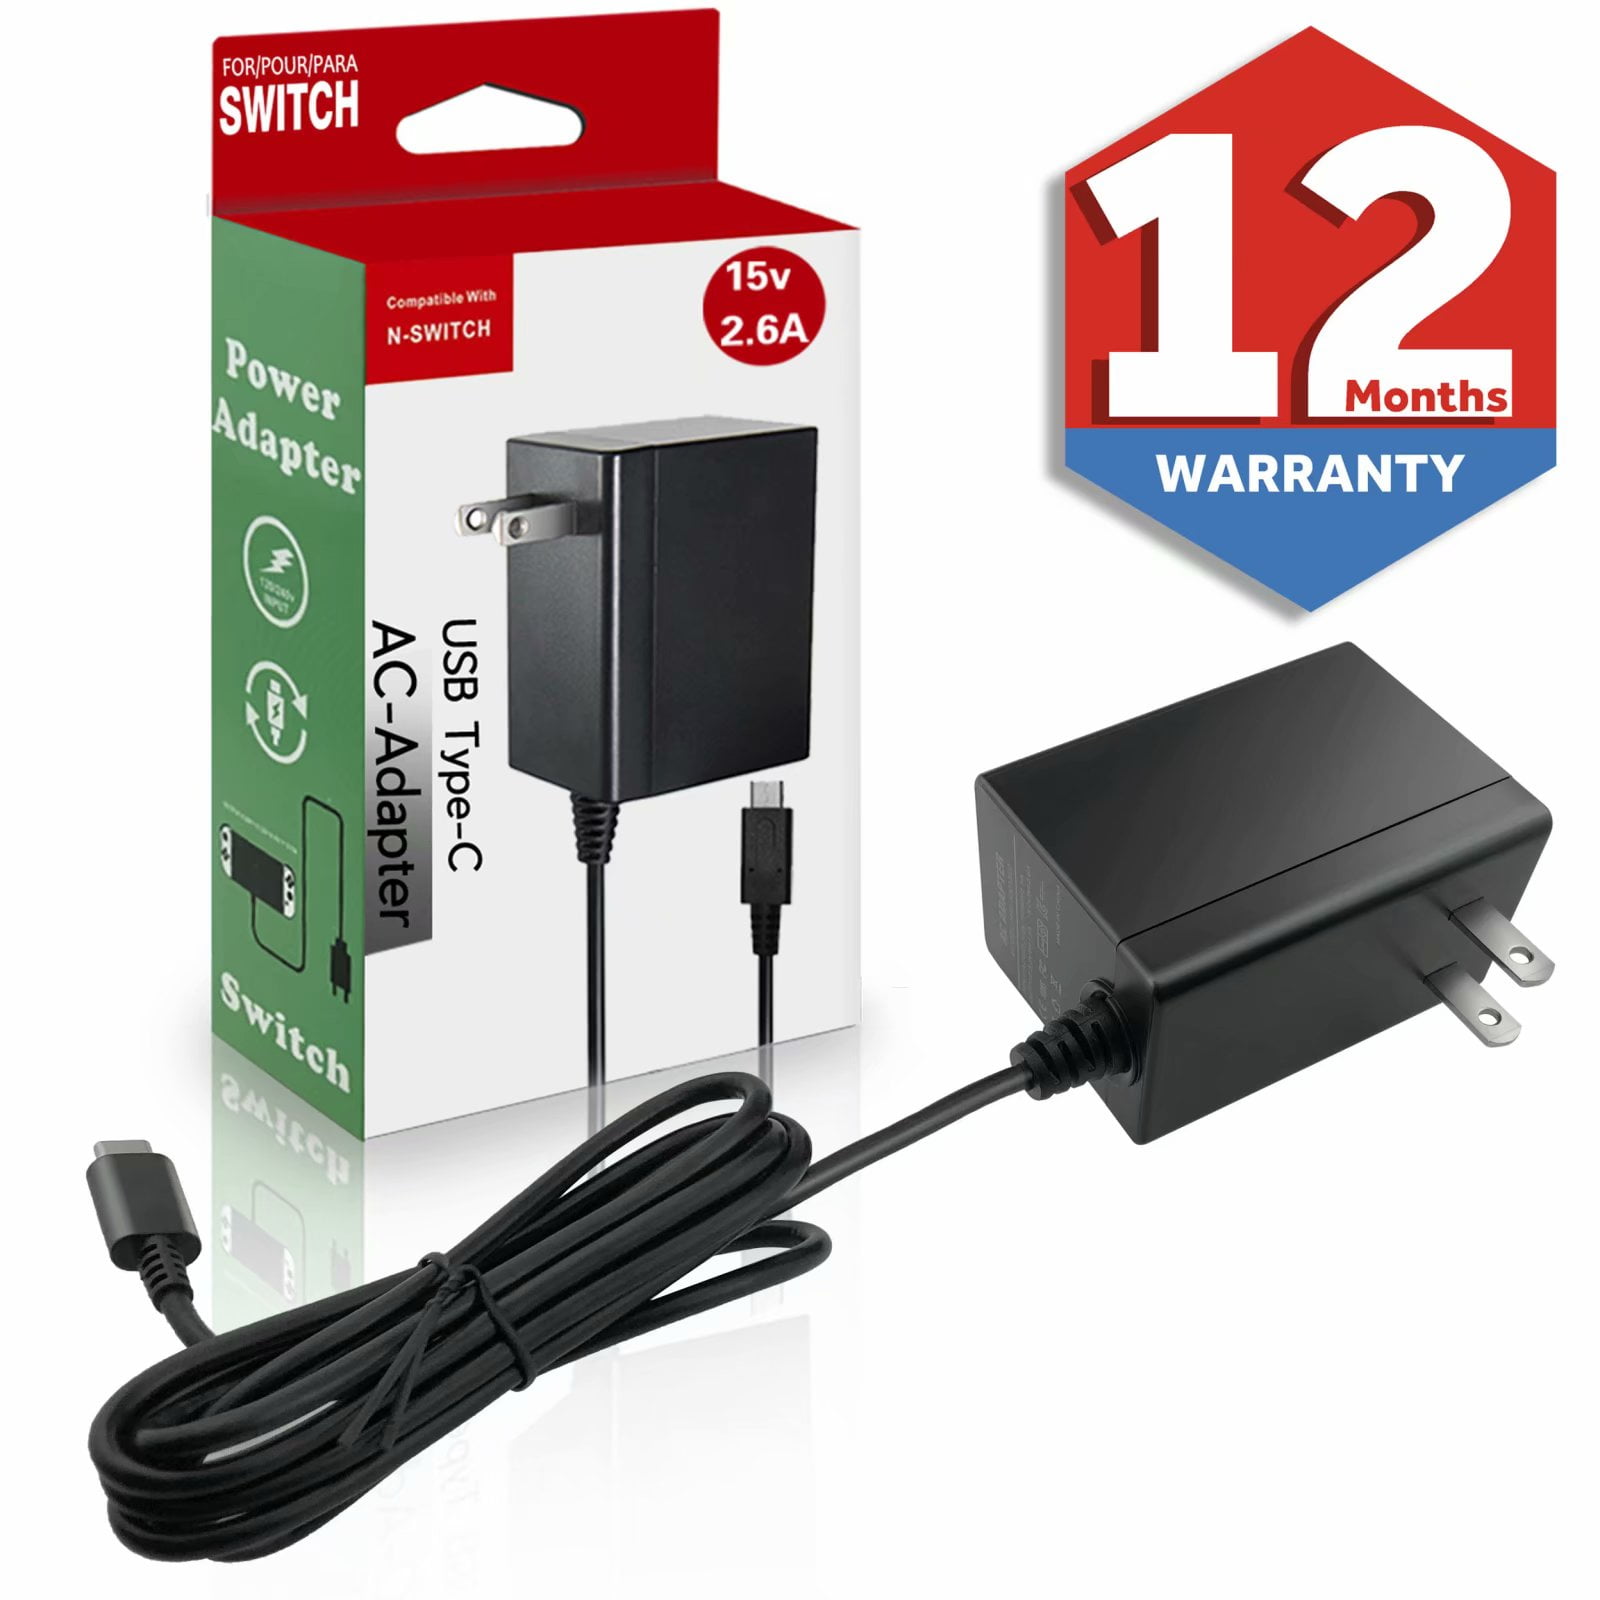 Switch Charger for Nintendo Switch，Switch AC Adapter Power Supply